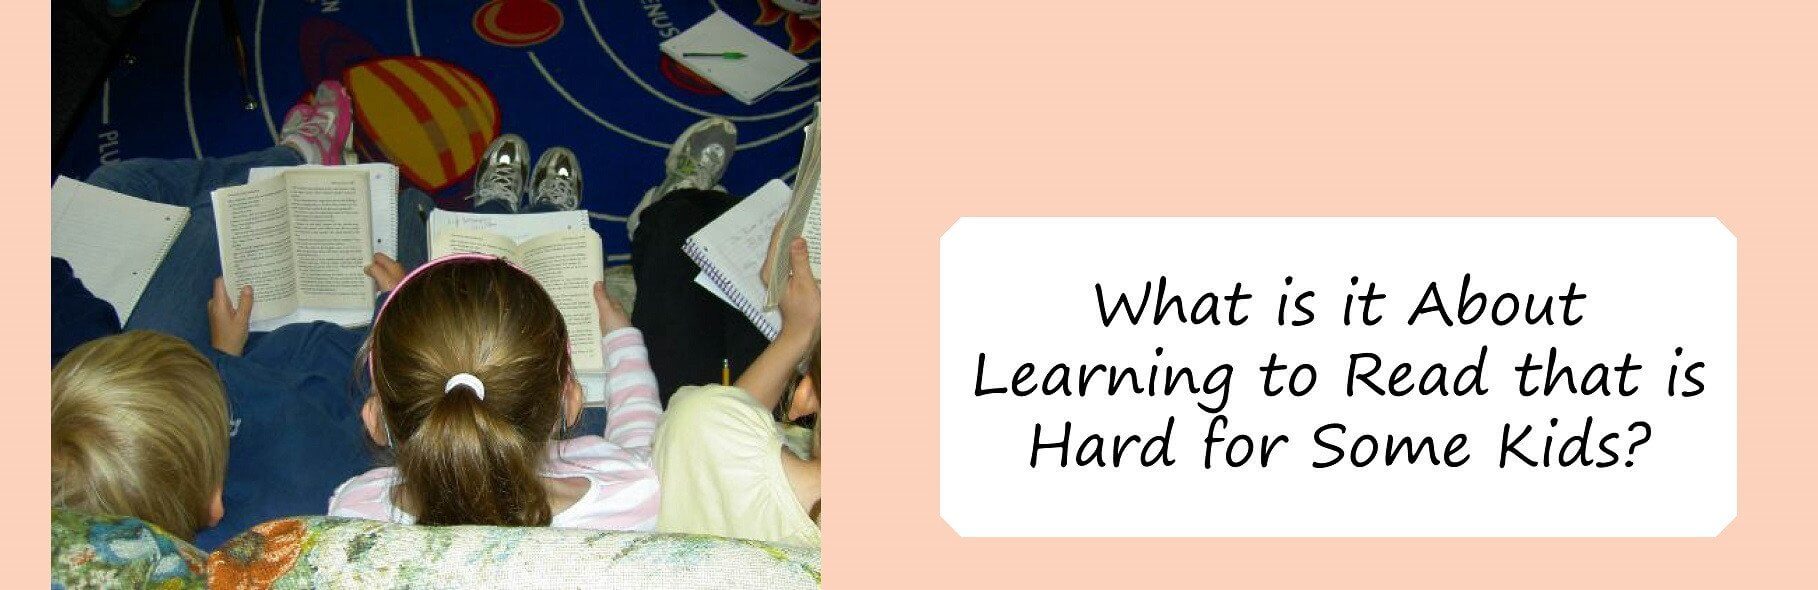 What is it About Learning to Read that is Hard for Some Kids?